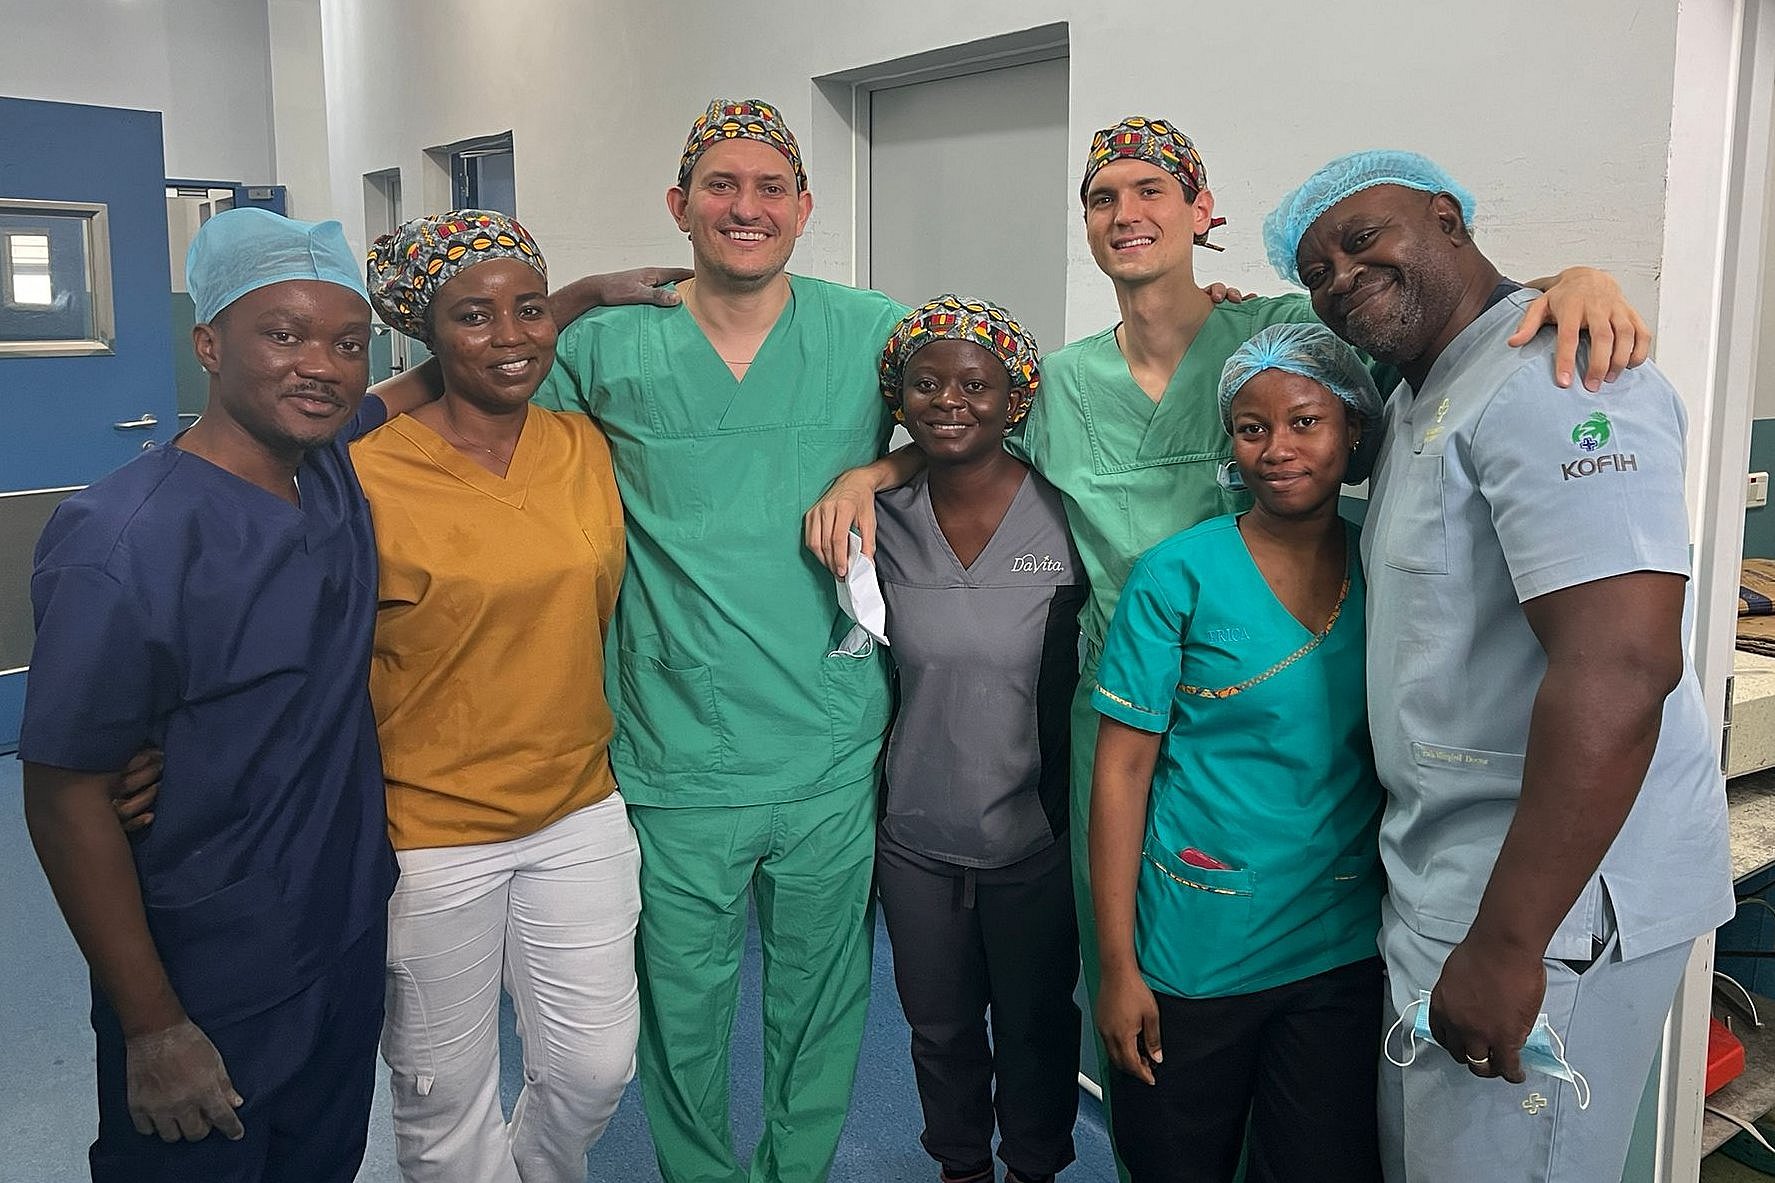 The team of Ghanaian and German doctors and surgical nurses